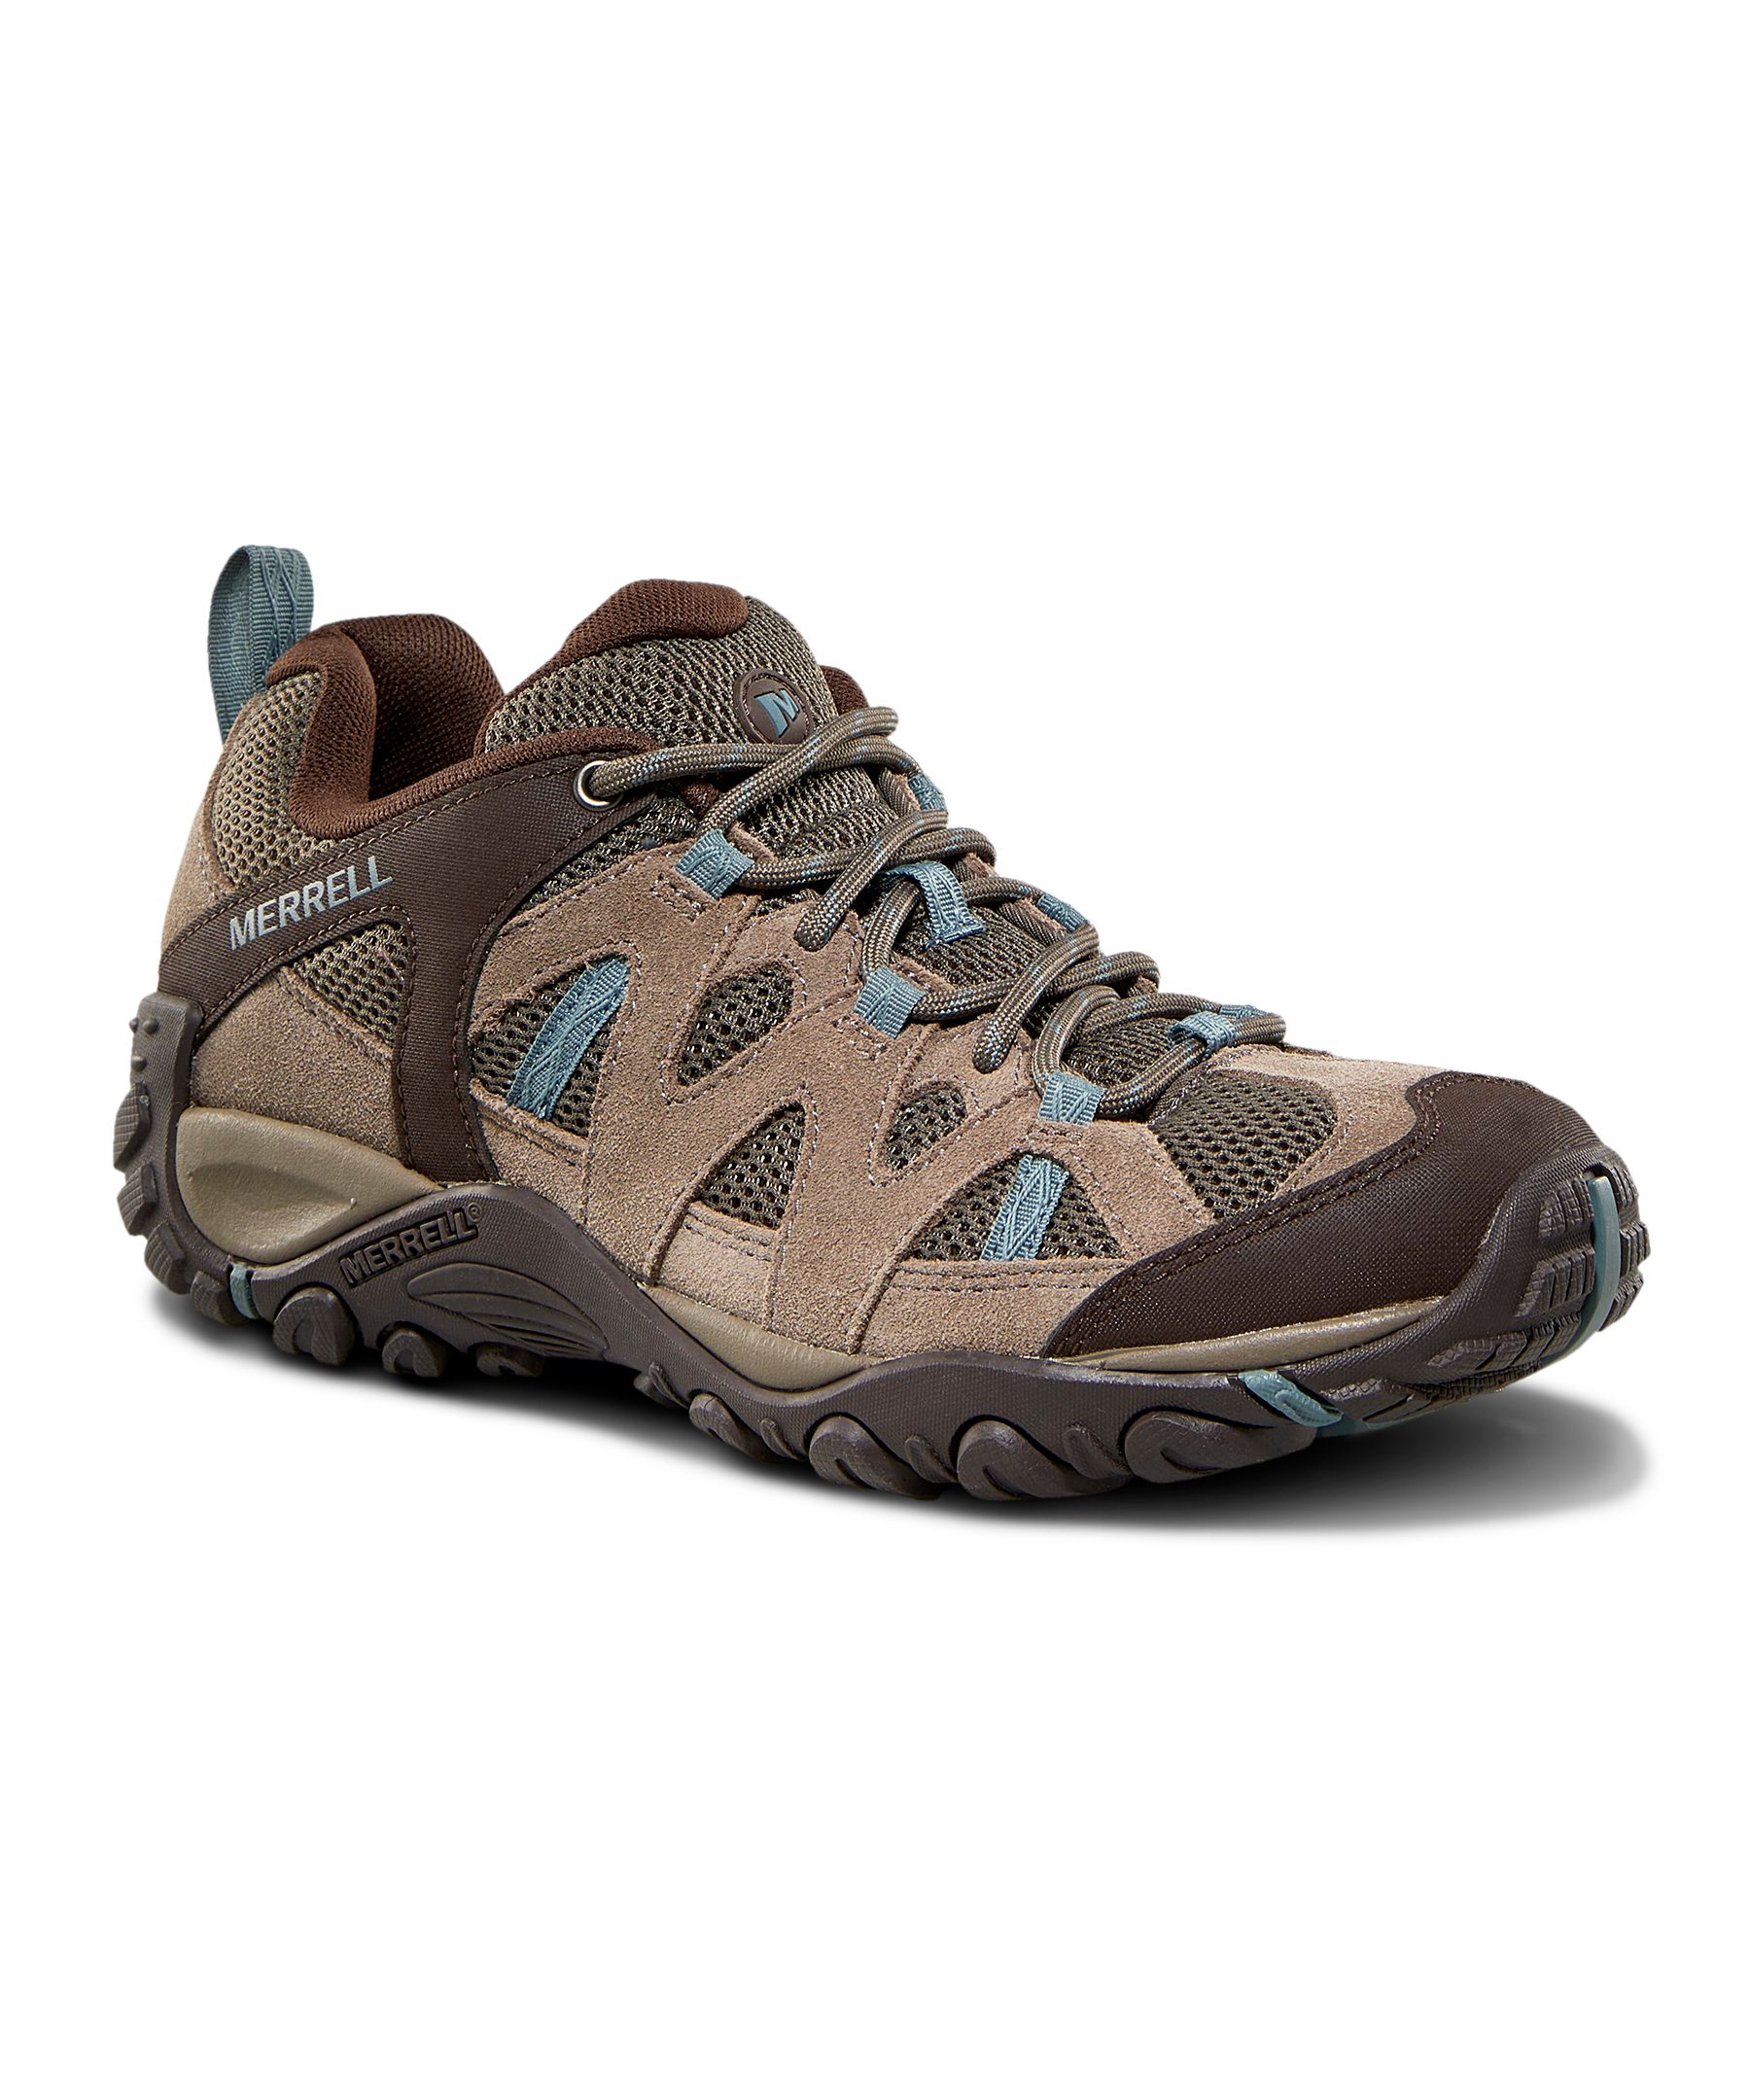 Playwright threshold Incompetence Merrell Women's Deverta 2 Hiking Shoes | Marks